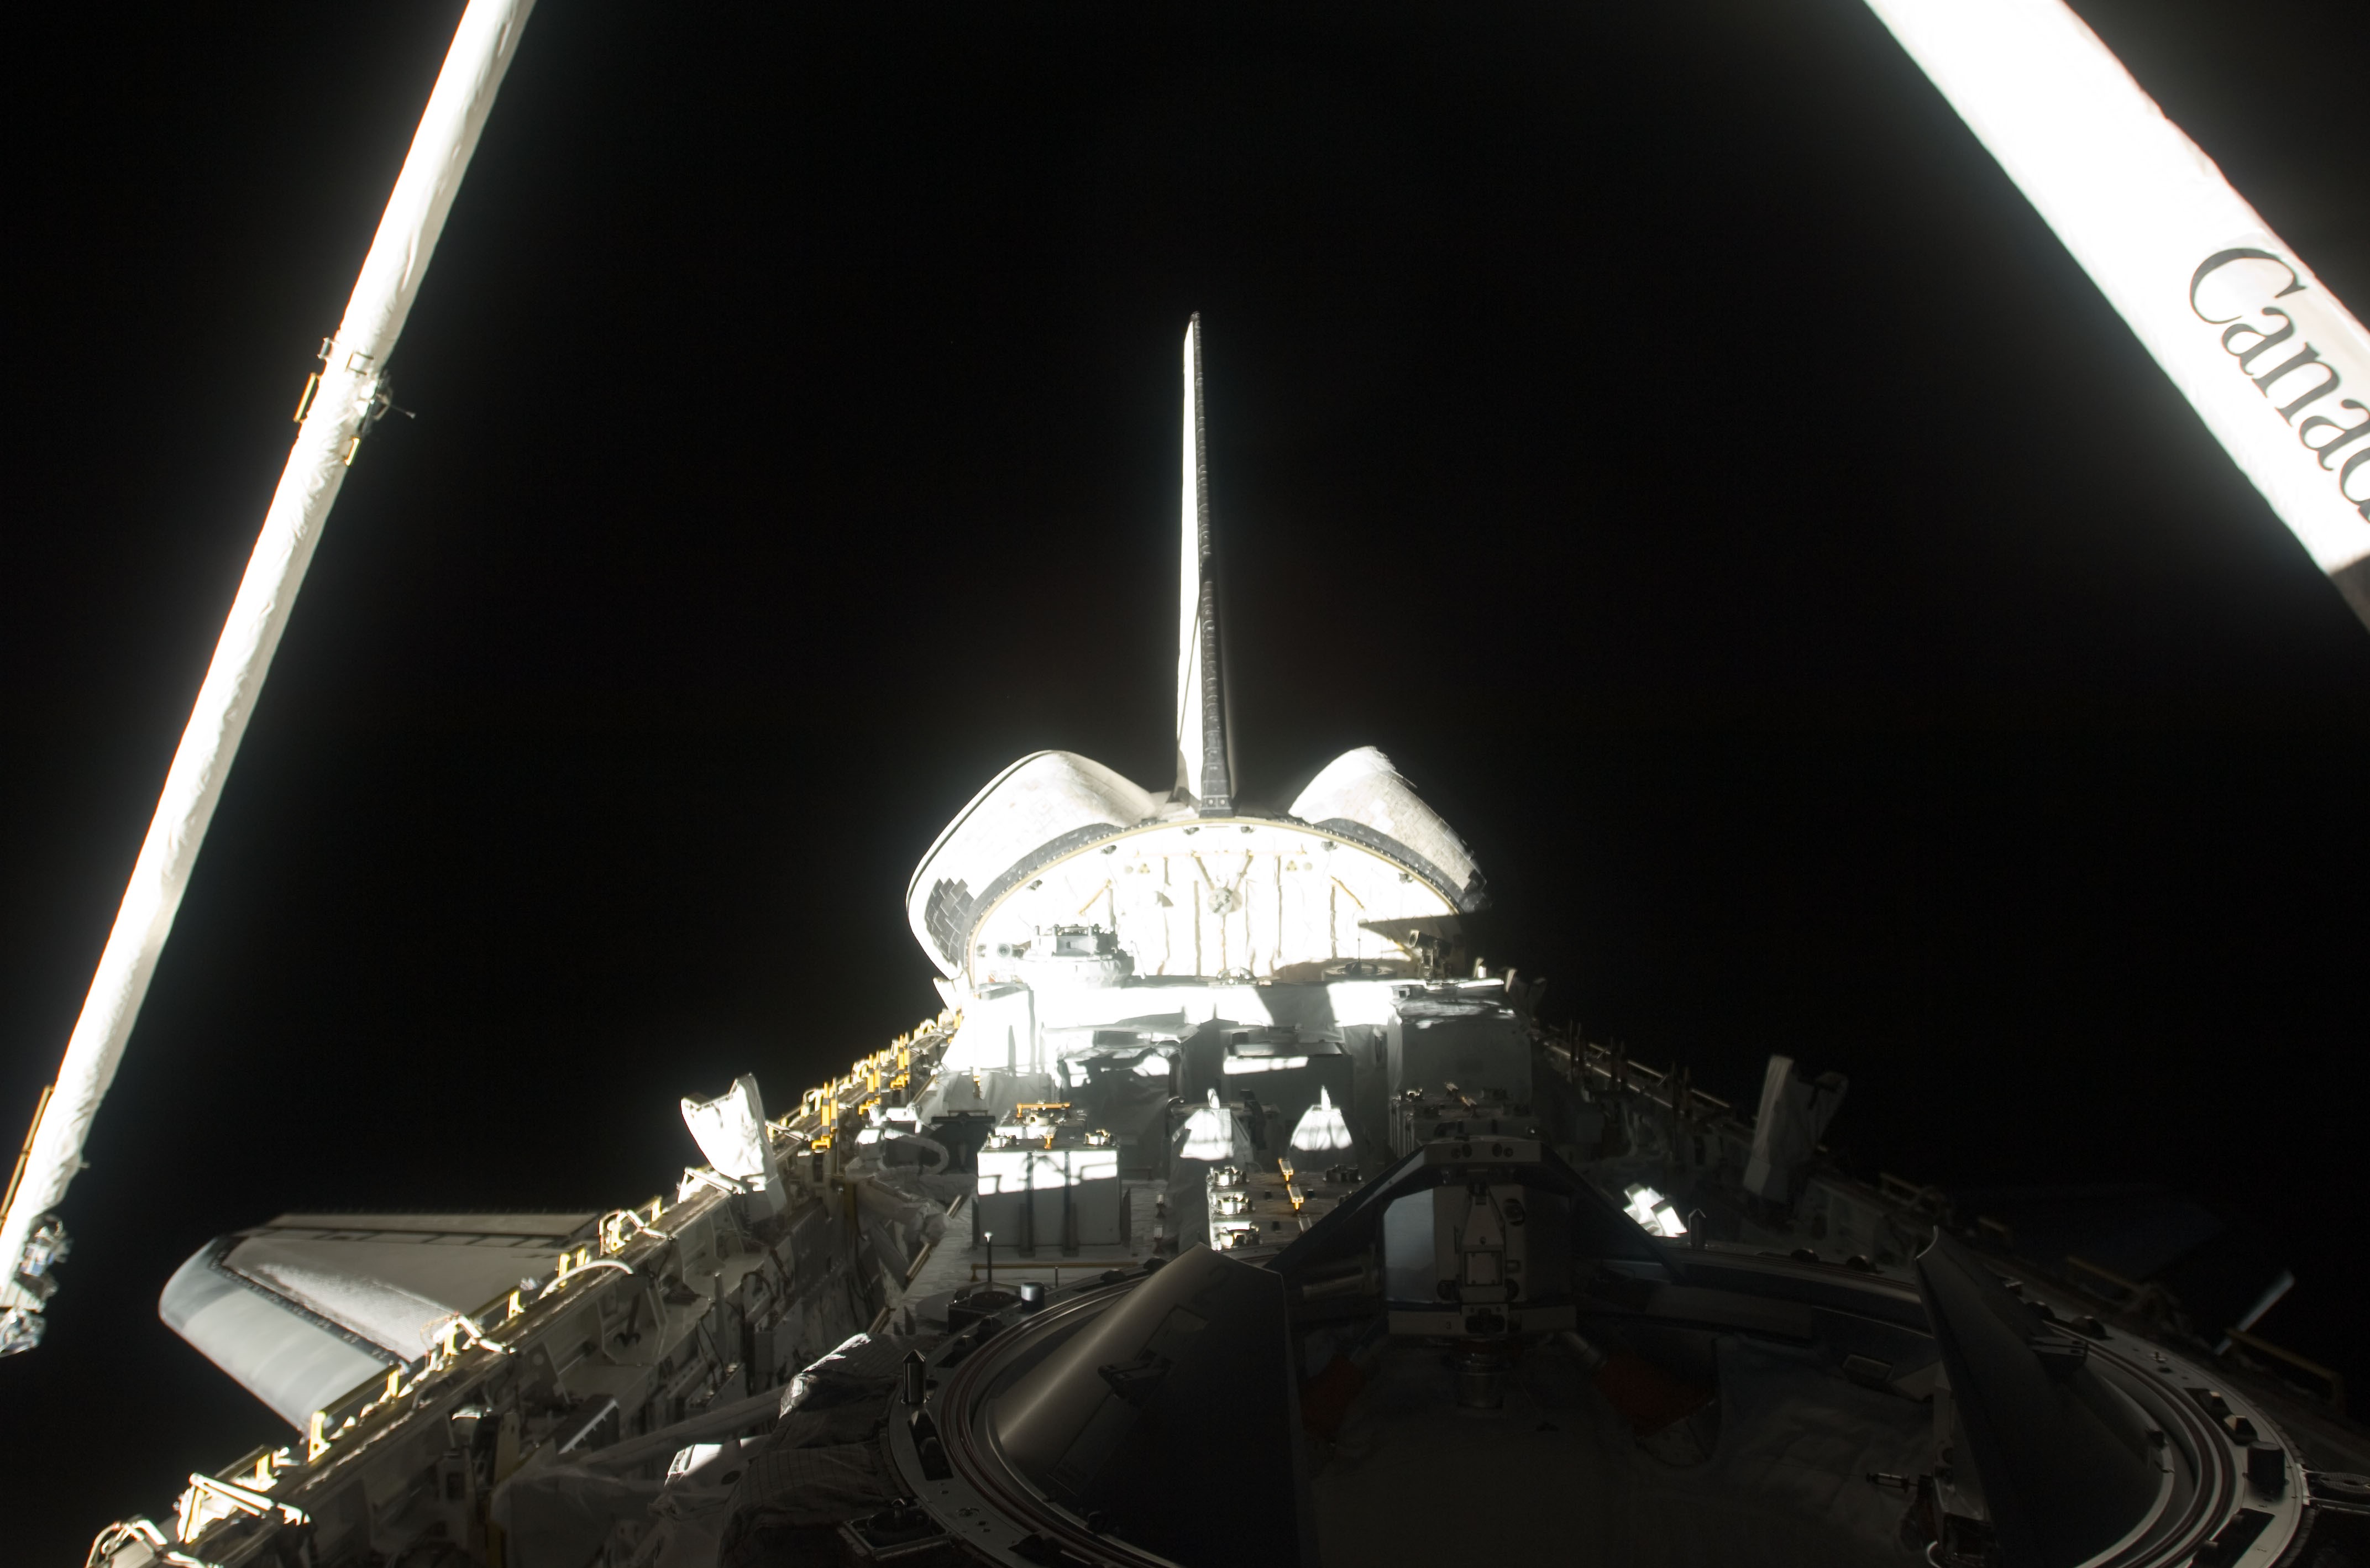 On the mission's second day, the Shuttle Remote Manipulator System (SRMS) uses the Orbiter Boom Sensor System to image Endeavour's Thermal Protection System (TPS)